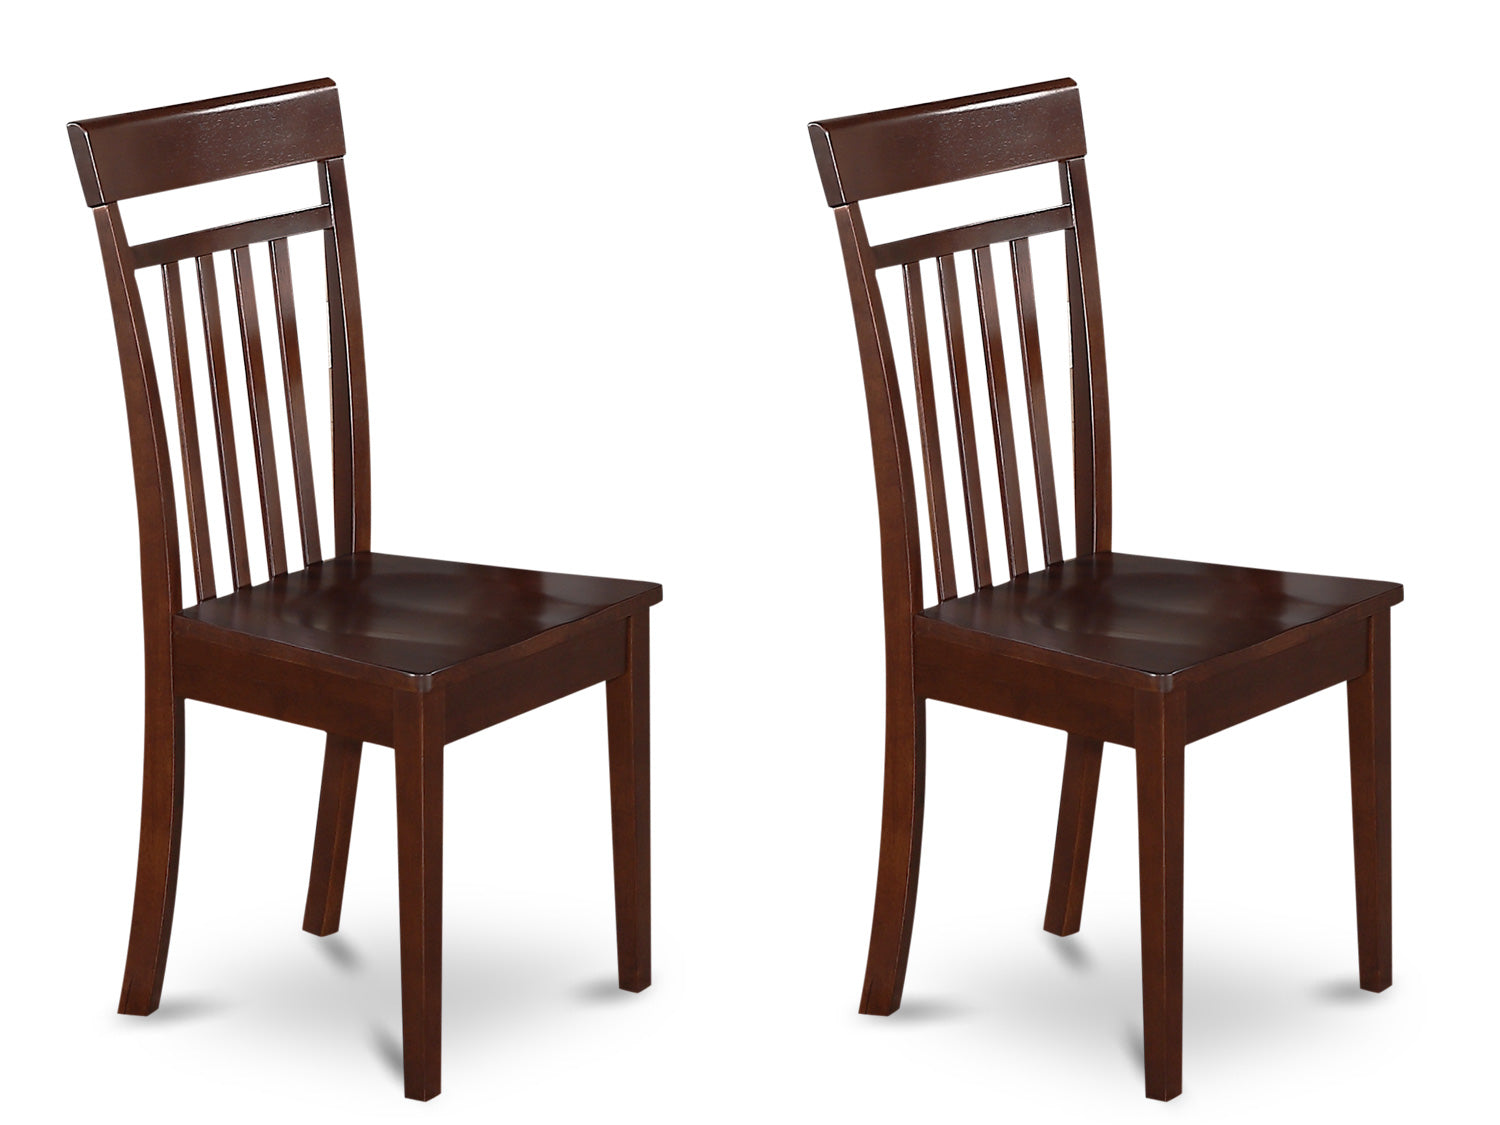 HLCA5-MAH-W 5 Pc set with a Round Small Table and 4 Wood Dinette Chairs in Mahogany